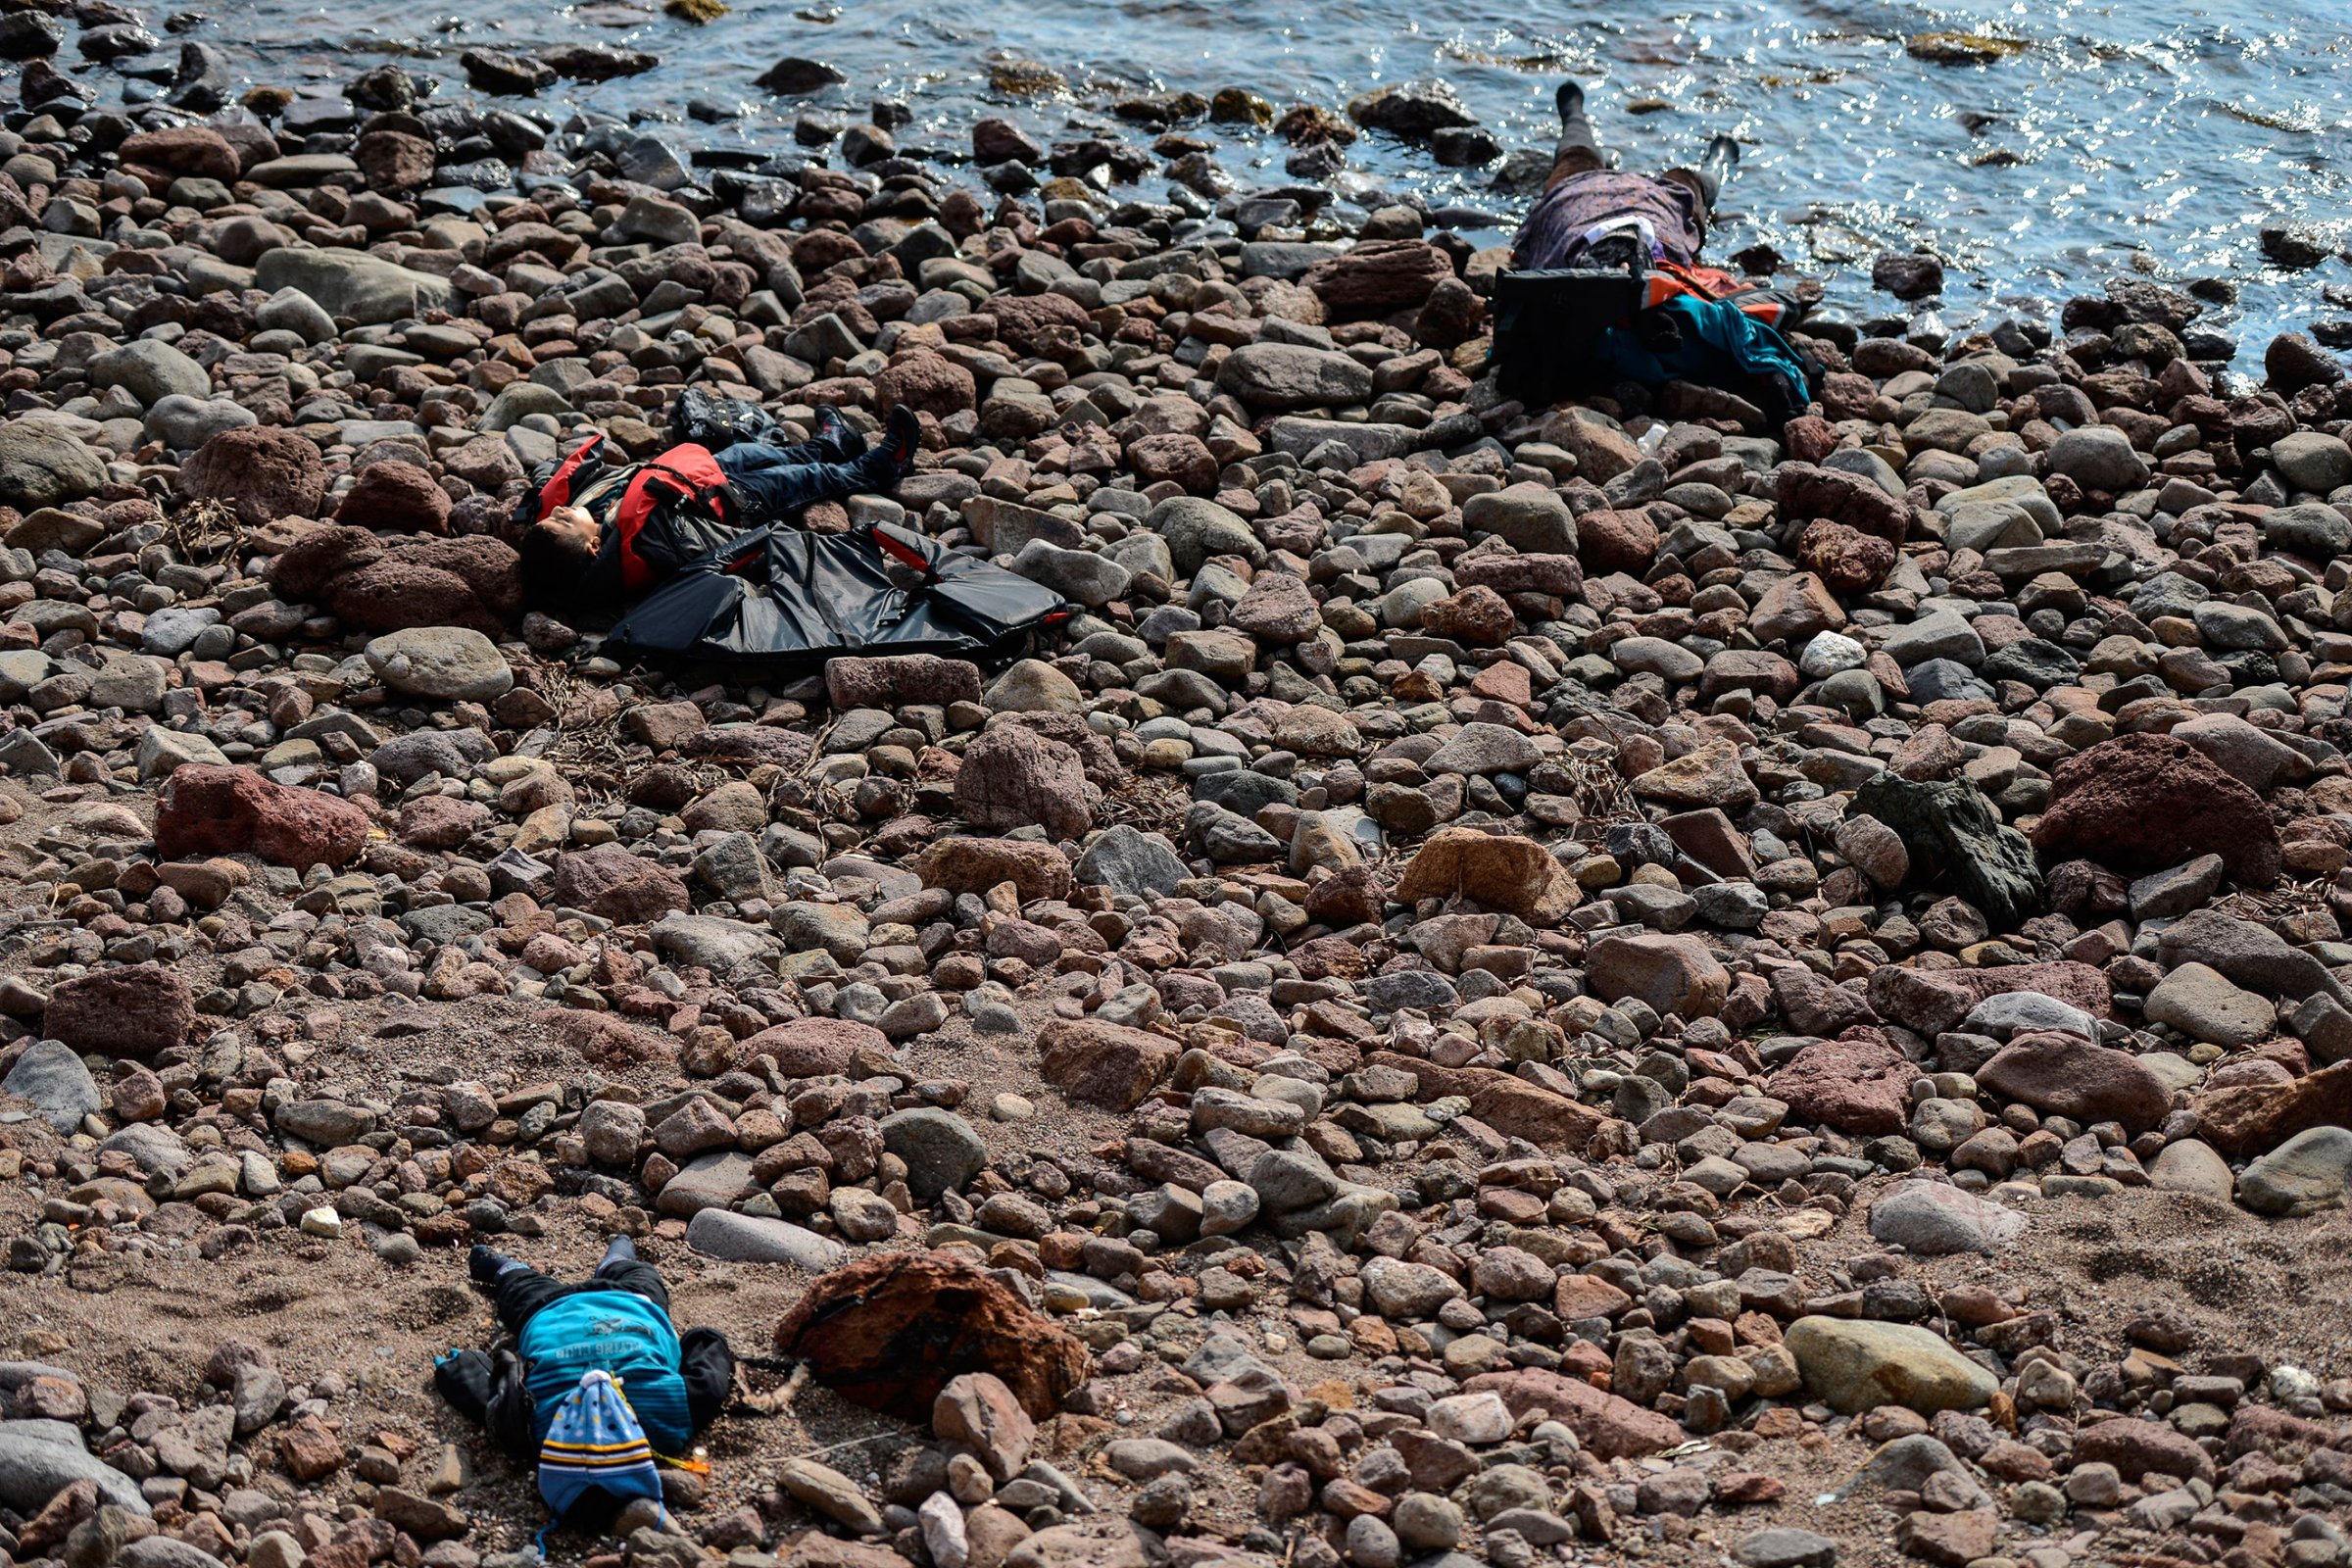 Three bodies are seen washed up on a beach after at least 37 migrants and refugees were killed when their boat sank in the Aegean while trying to cross to Greece. Canakkale, Turkey, Jan. 30, 2016.